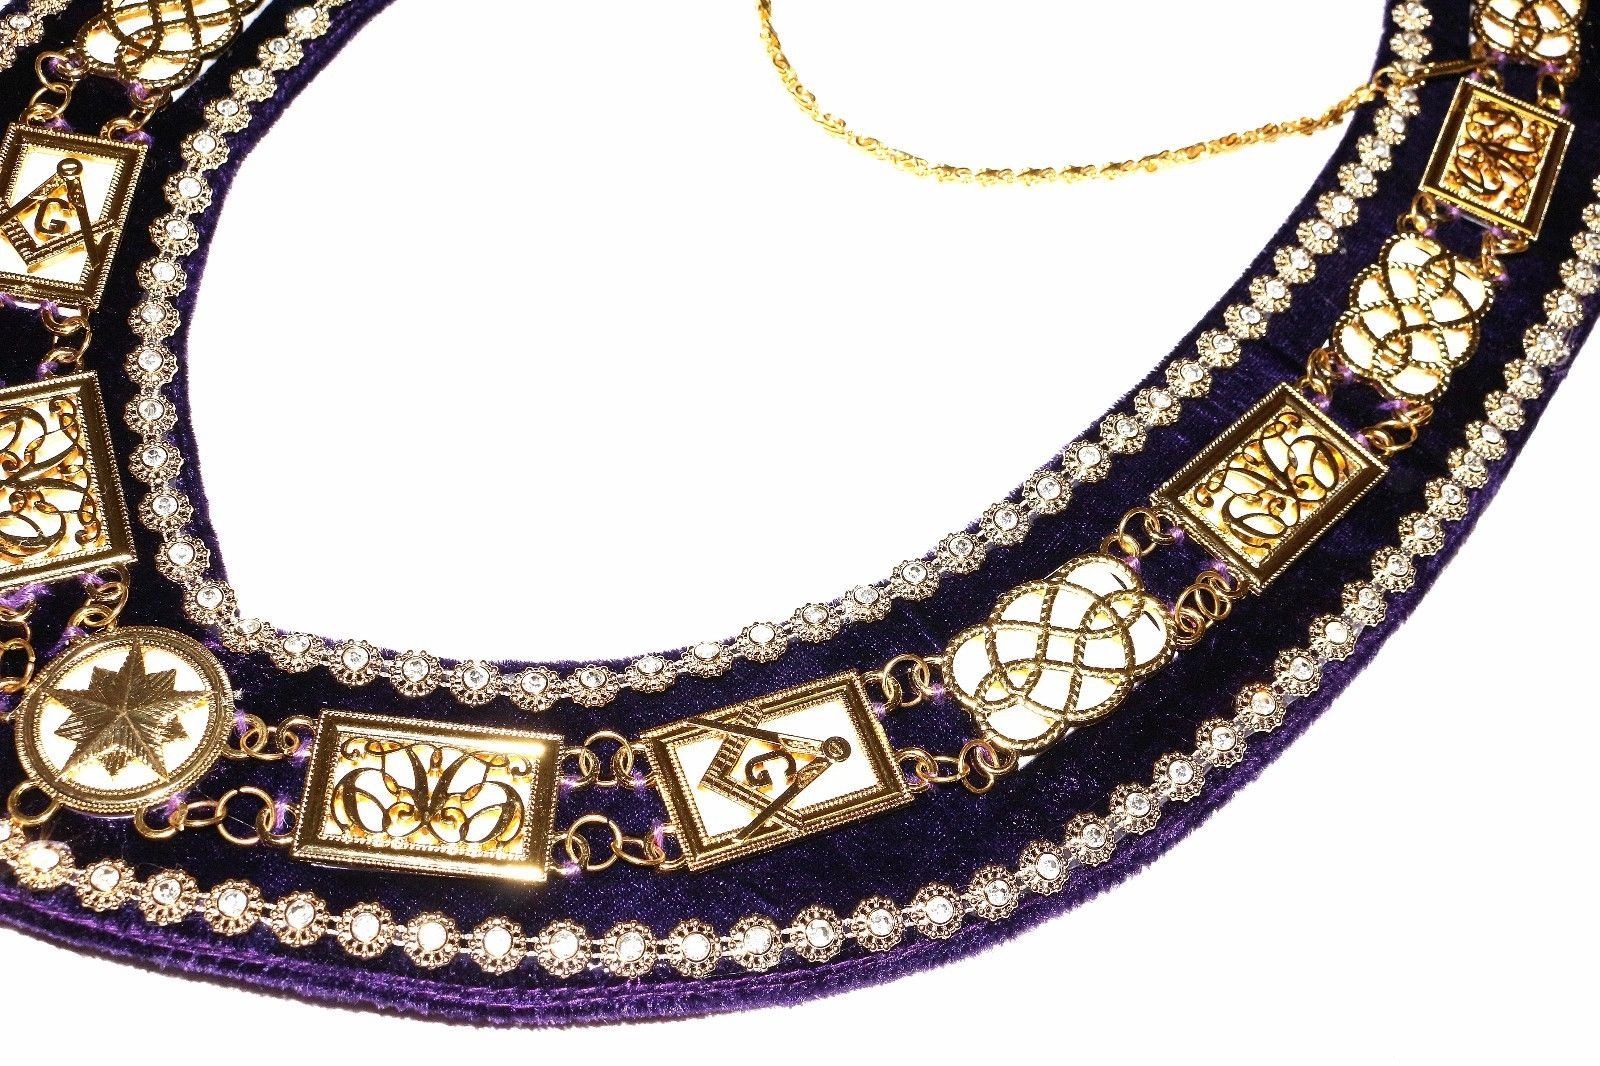 Grand Officers Blue Lodge Chain Collar - Gold Plated with Purple Velvet - Bricks Masons